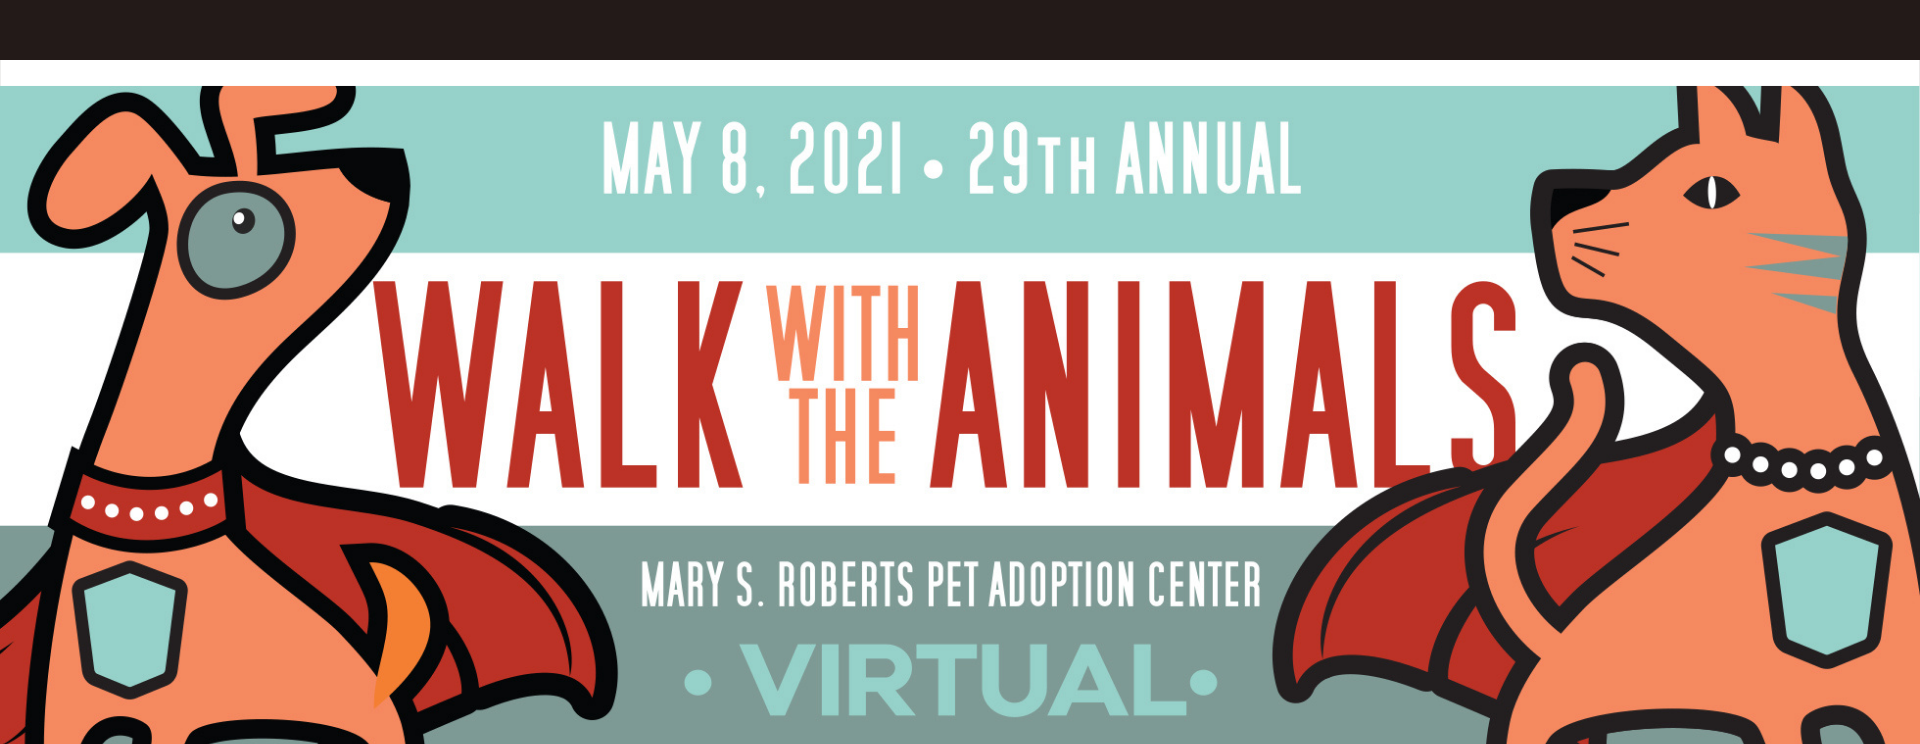 Walk with the Animals Silent Auction